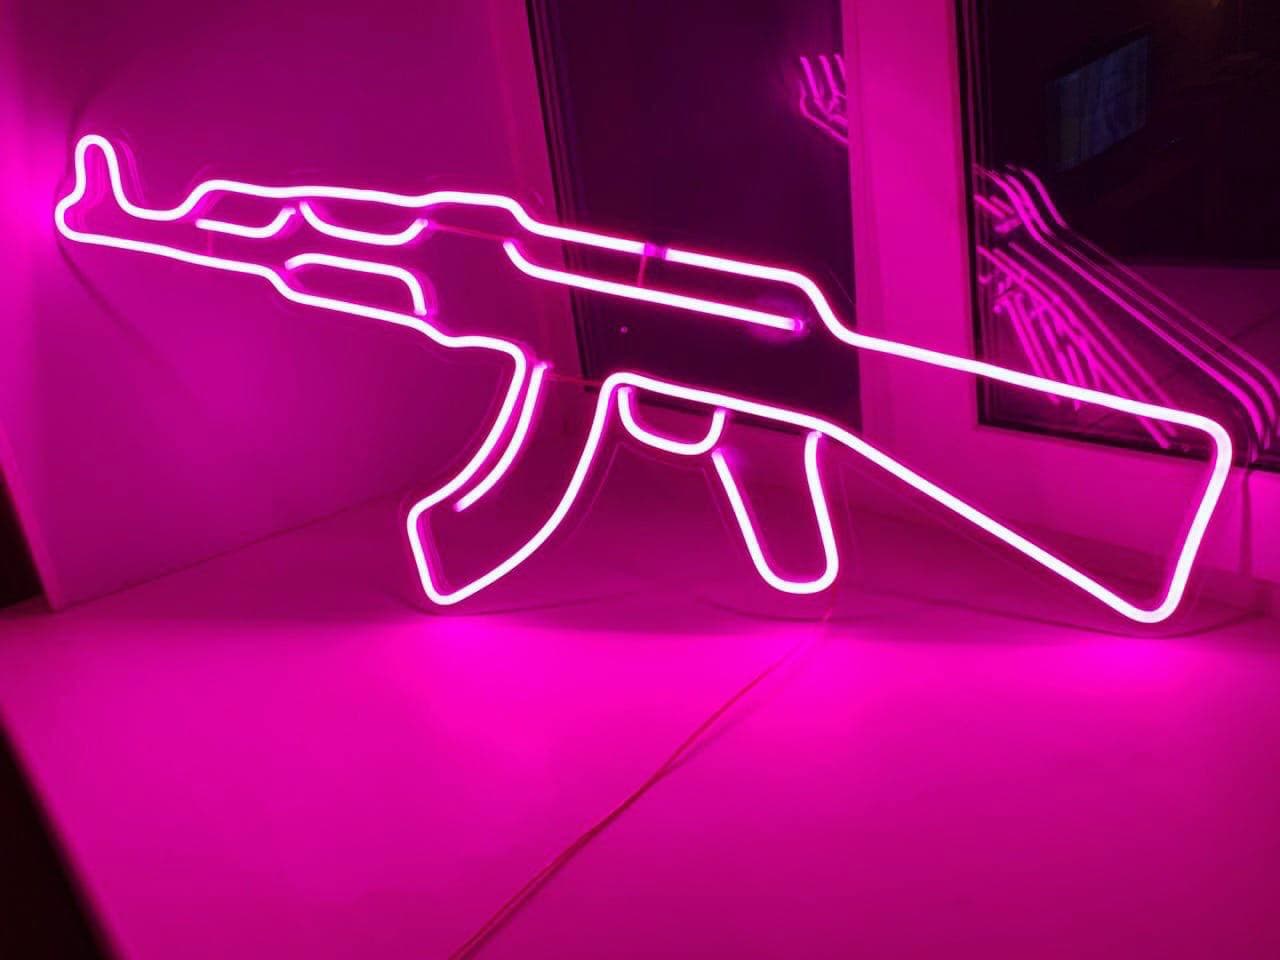 AK-47 Pink wallpaper created by